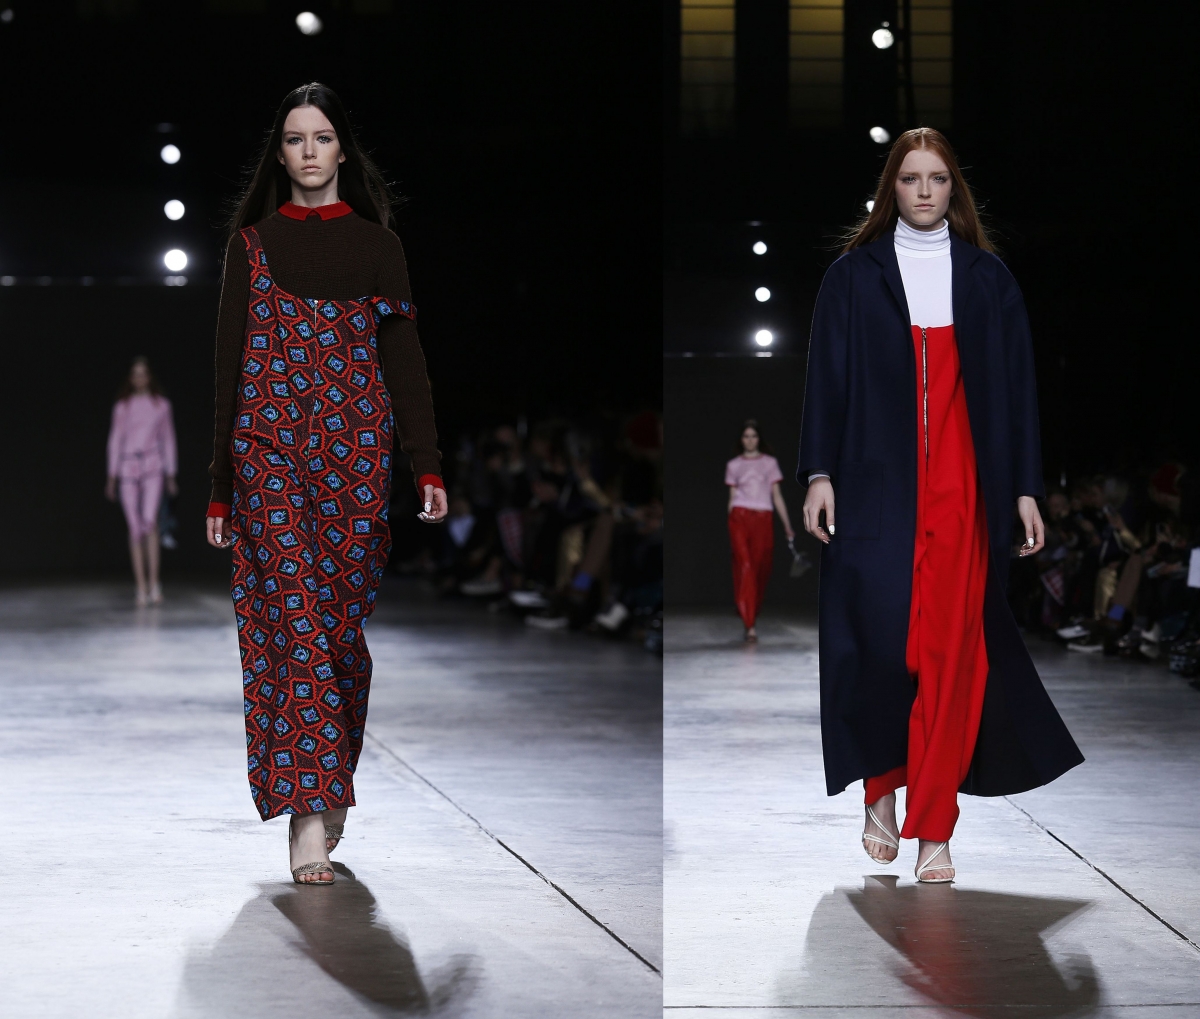 London Fashion Week Roundup: Sheer Tops and Cocktail Dresses Close AW14 ...